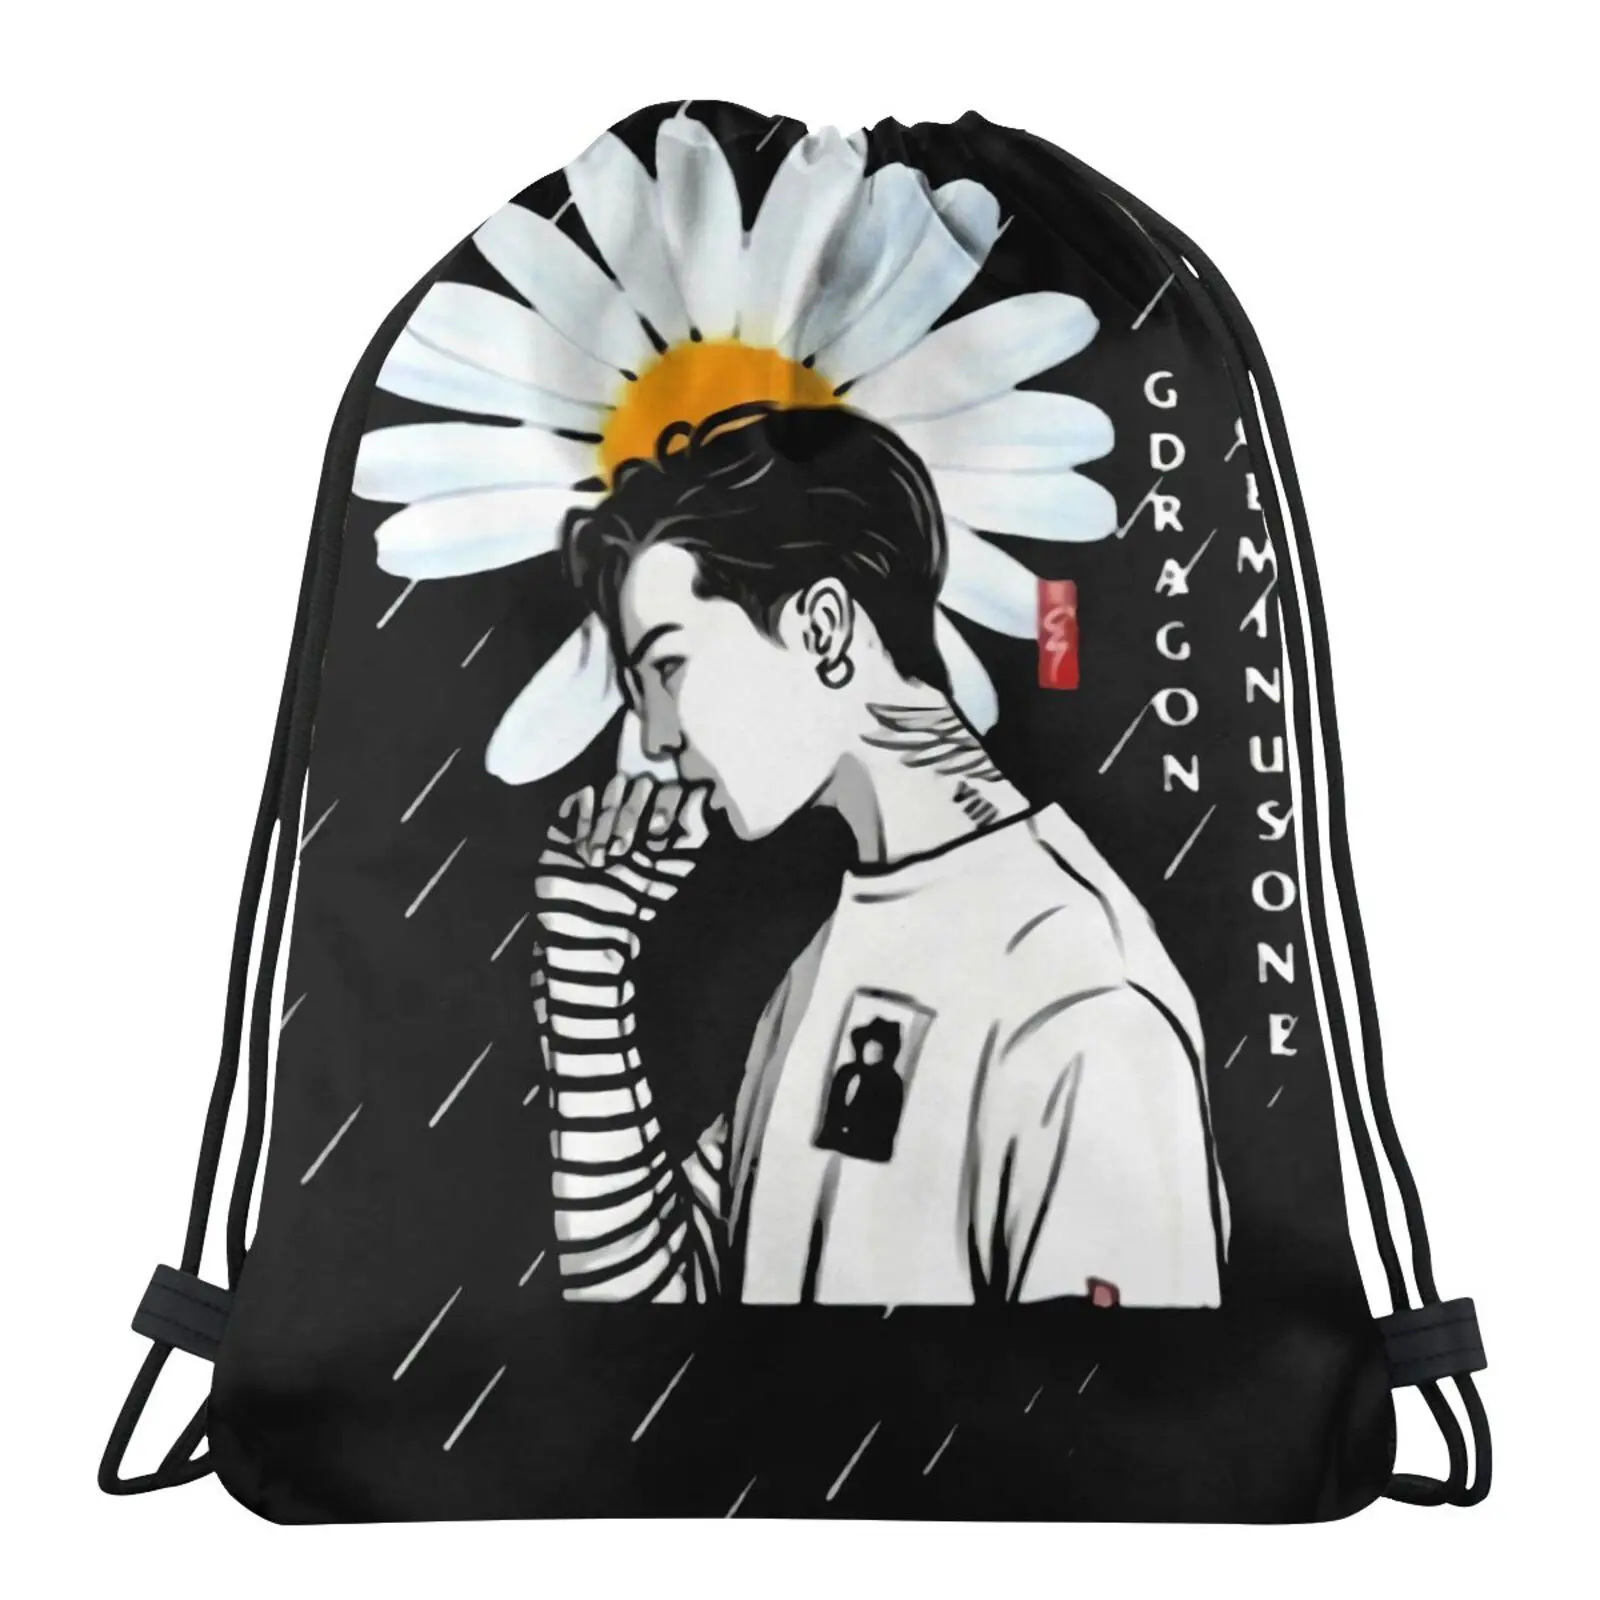 

Daisy G Dragon Peaceminusone 53 Bag Anime Bag Suitcases Draw String Bags Pouch Bag For Shoes Shoe Bag For School Backpack Sack